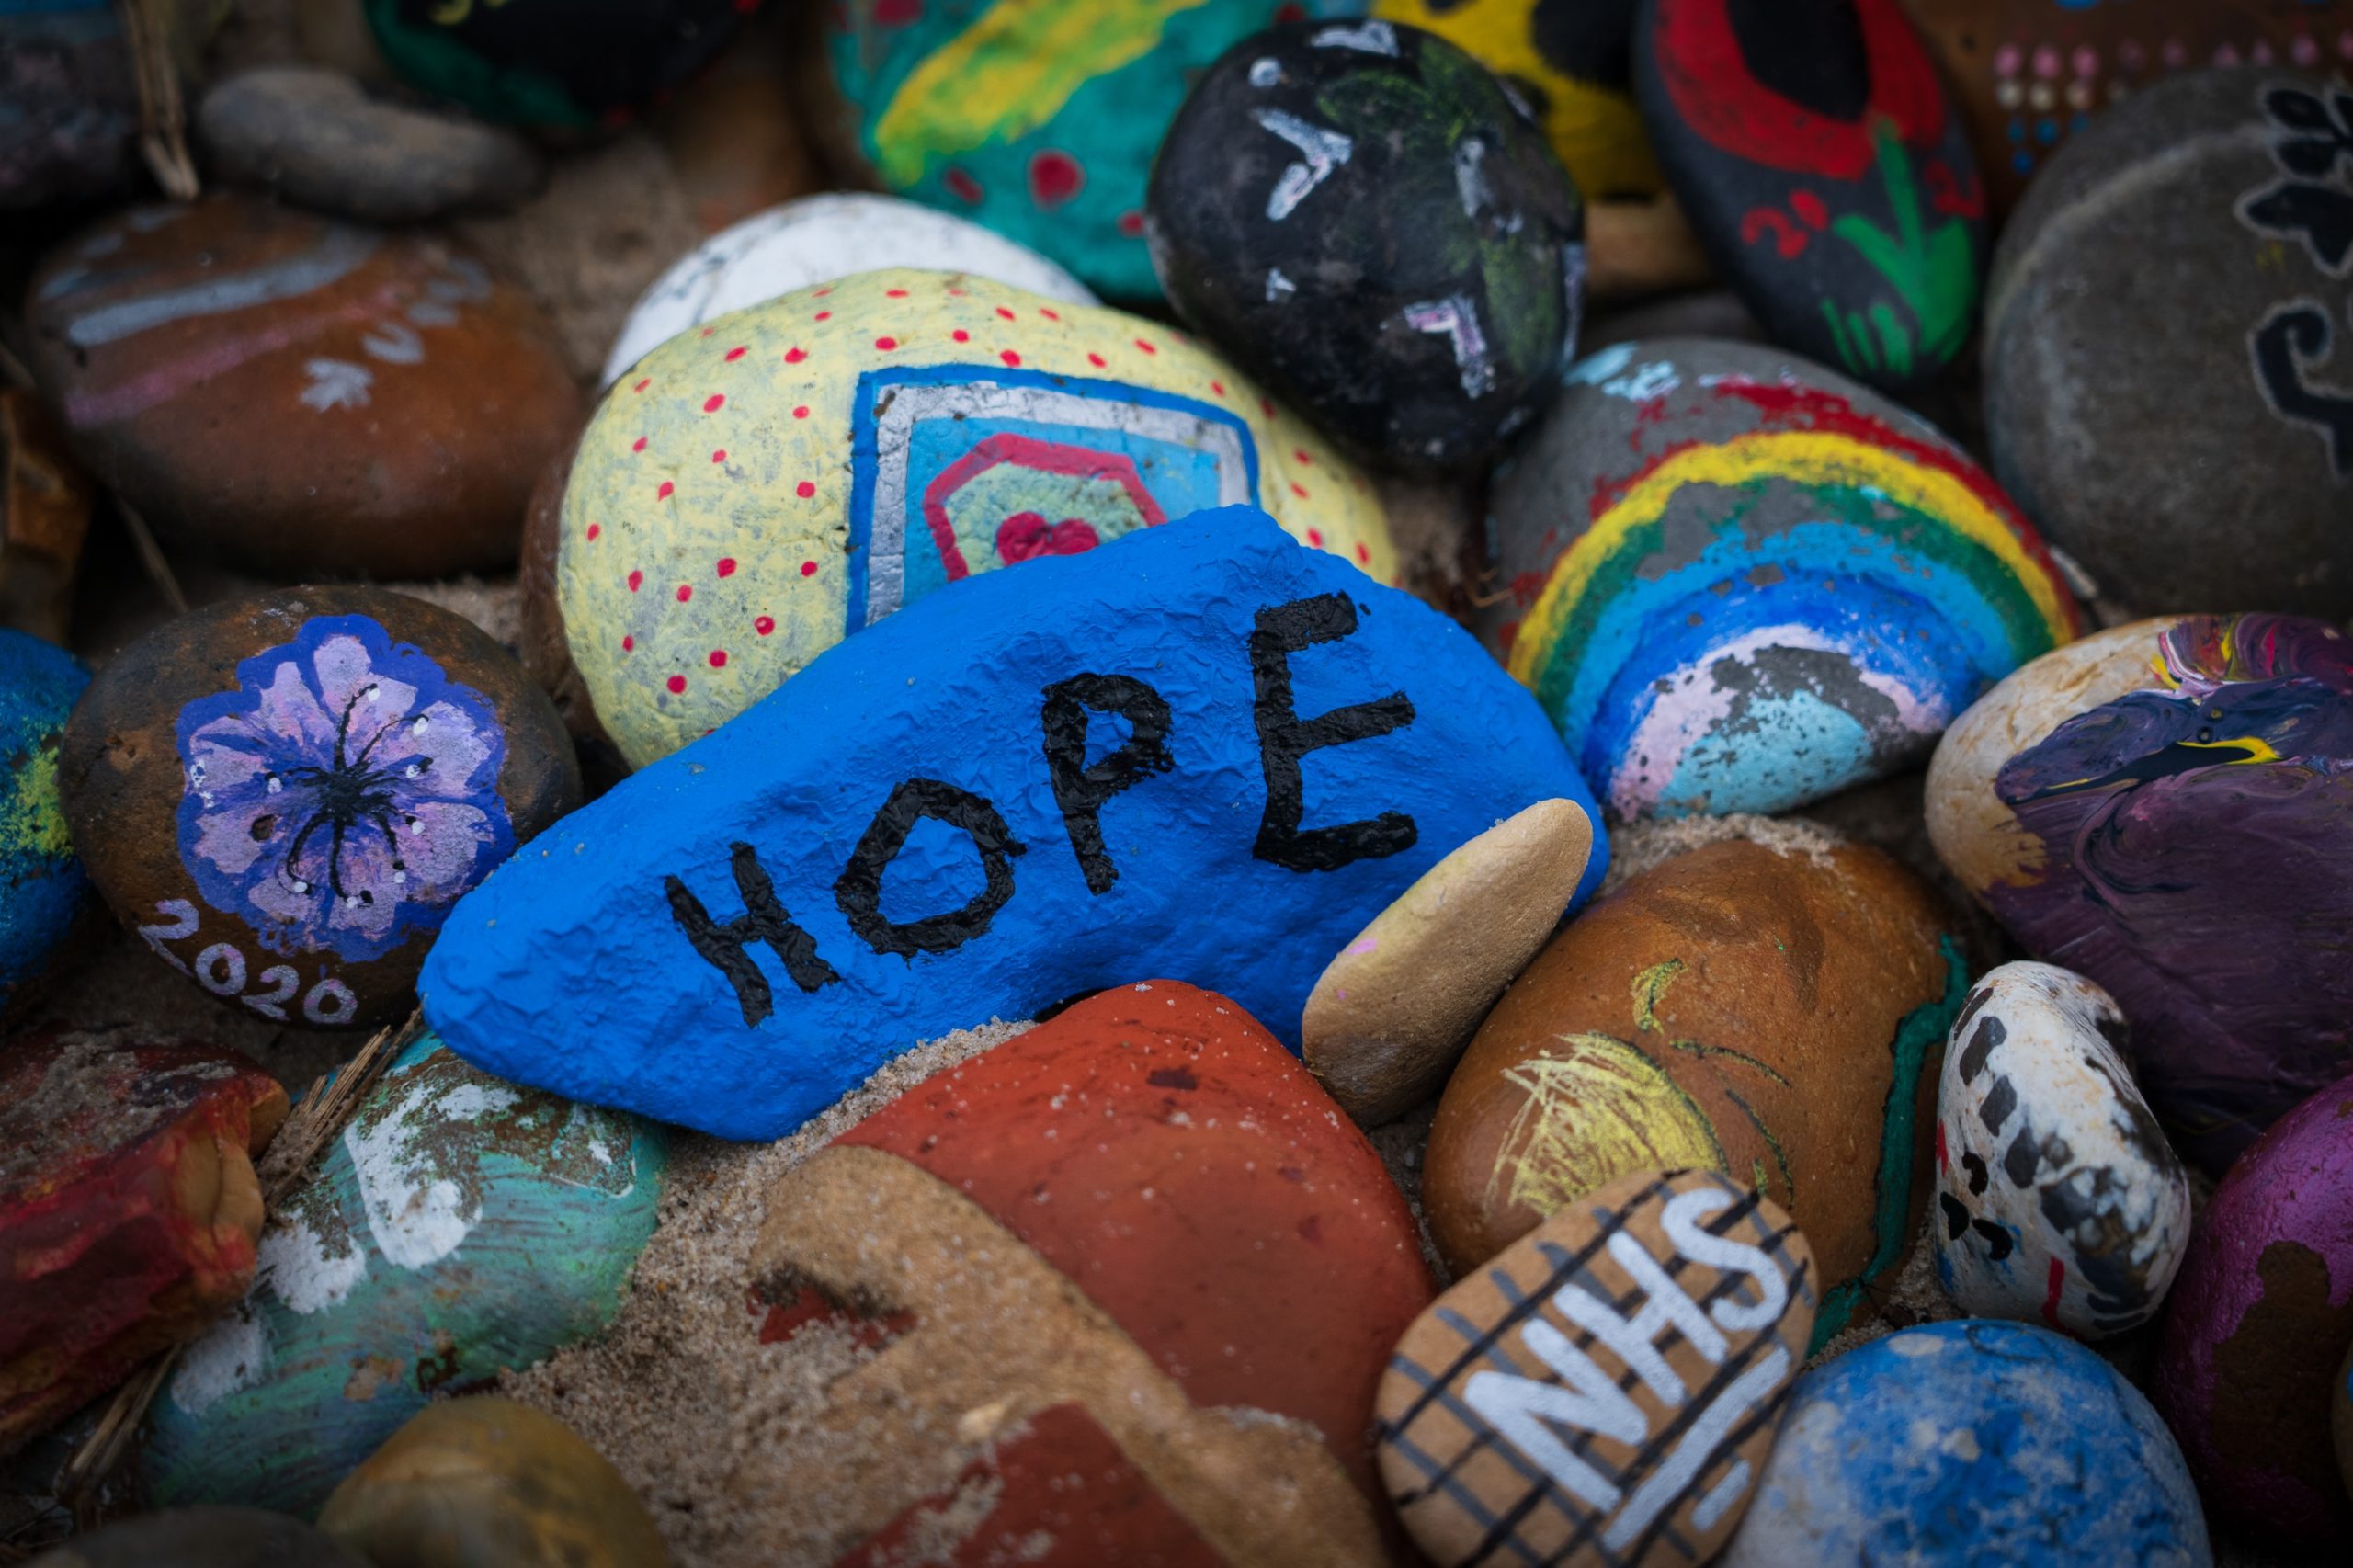 Painted pebbles, one with the word 'hope', and another with 'NHS'.